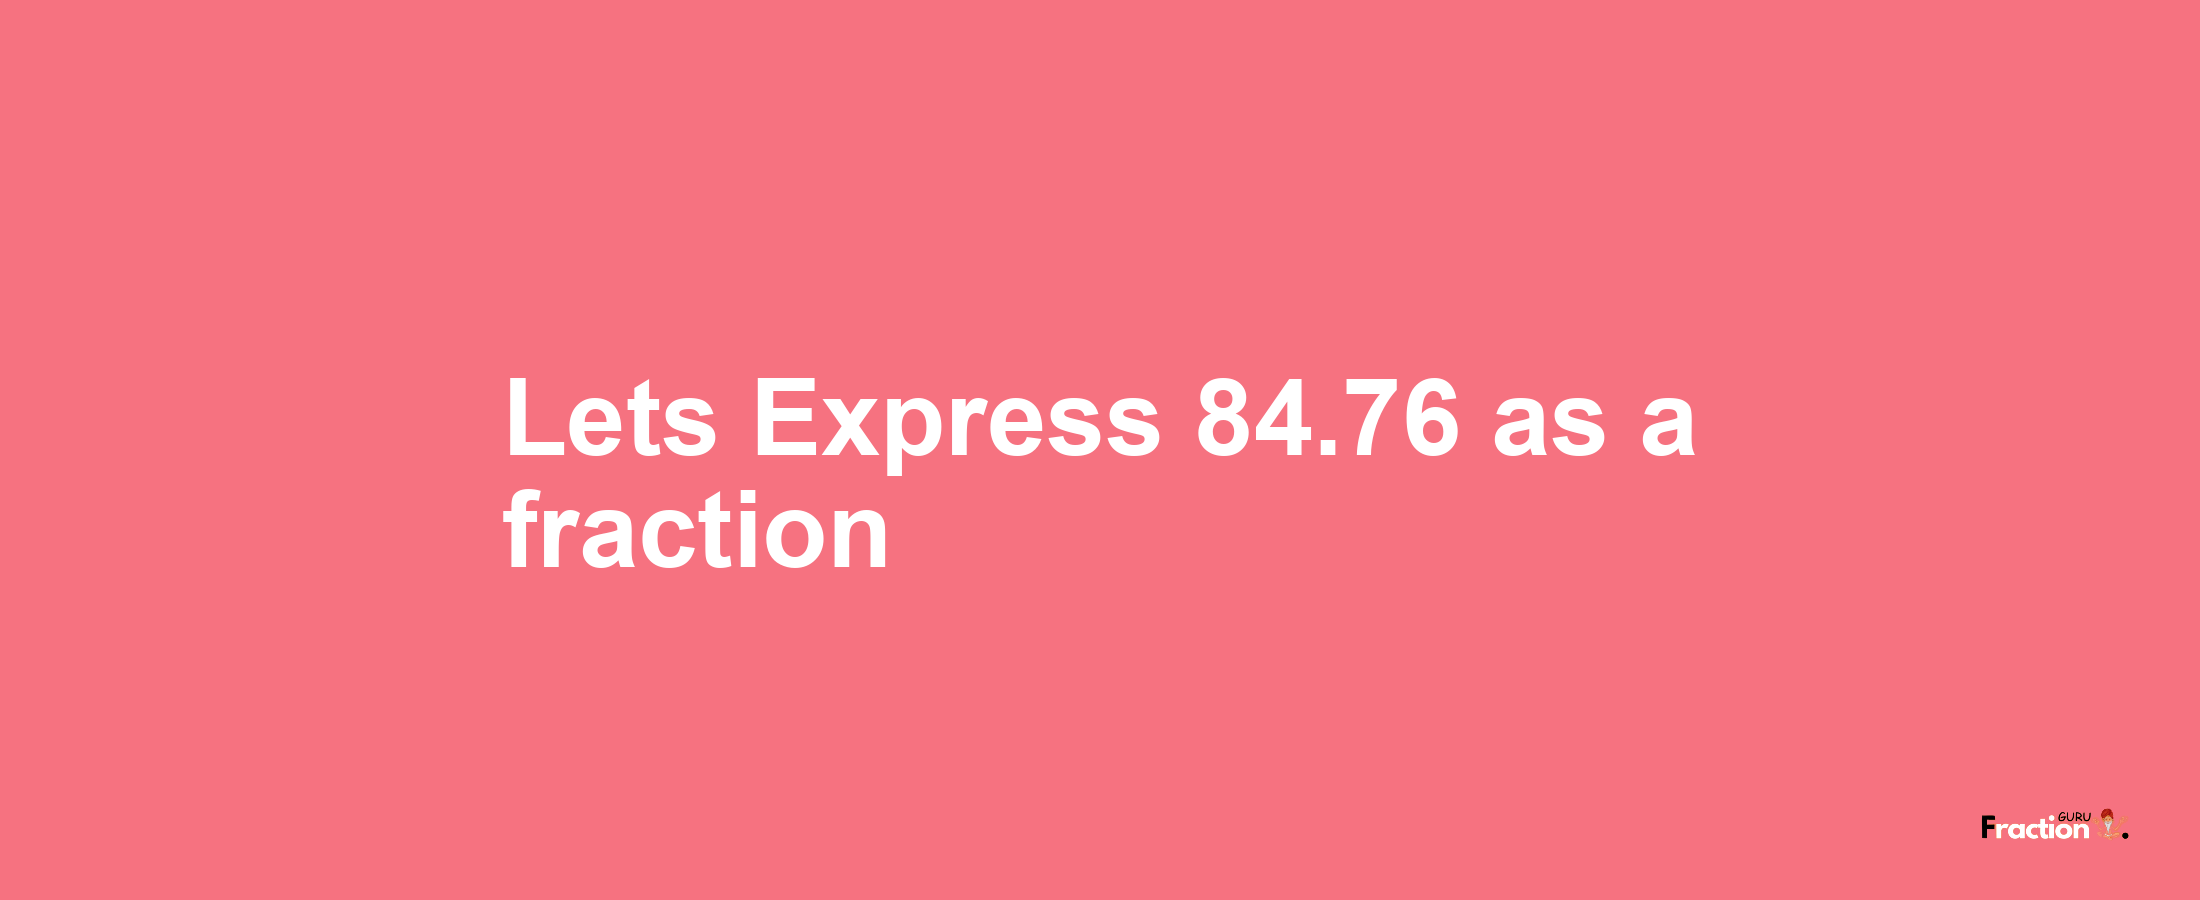 Lets Express 84.76 as afraction